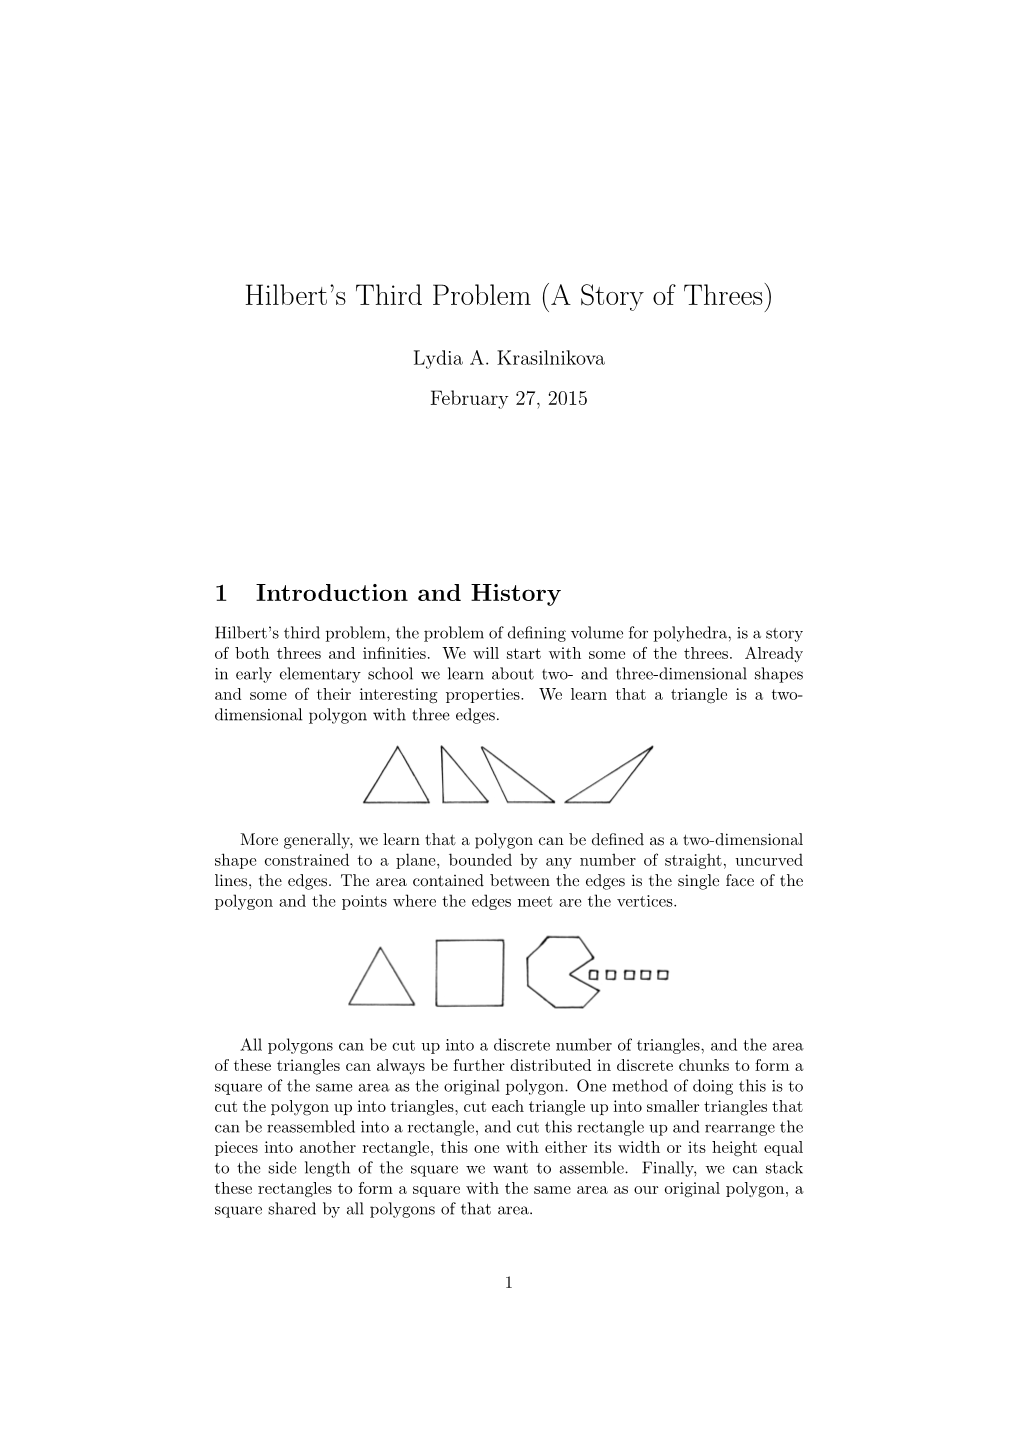 Hilbert's Third Problem (A Story of Threes)